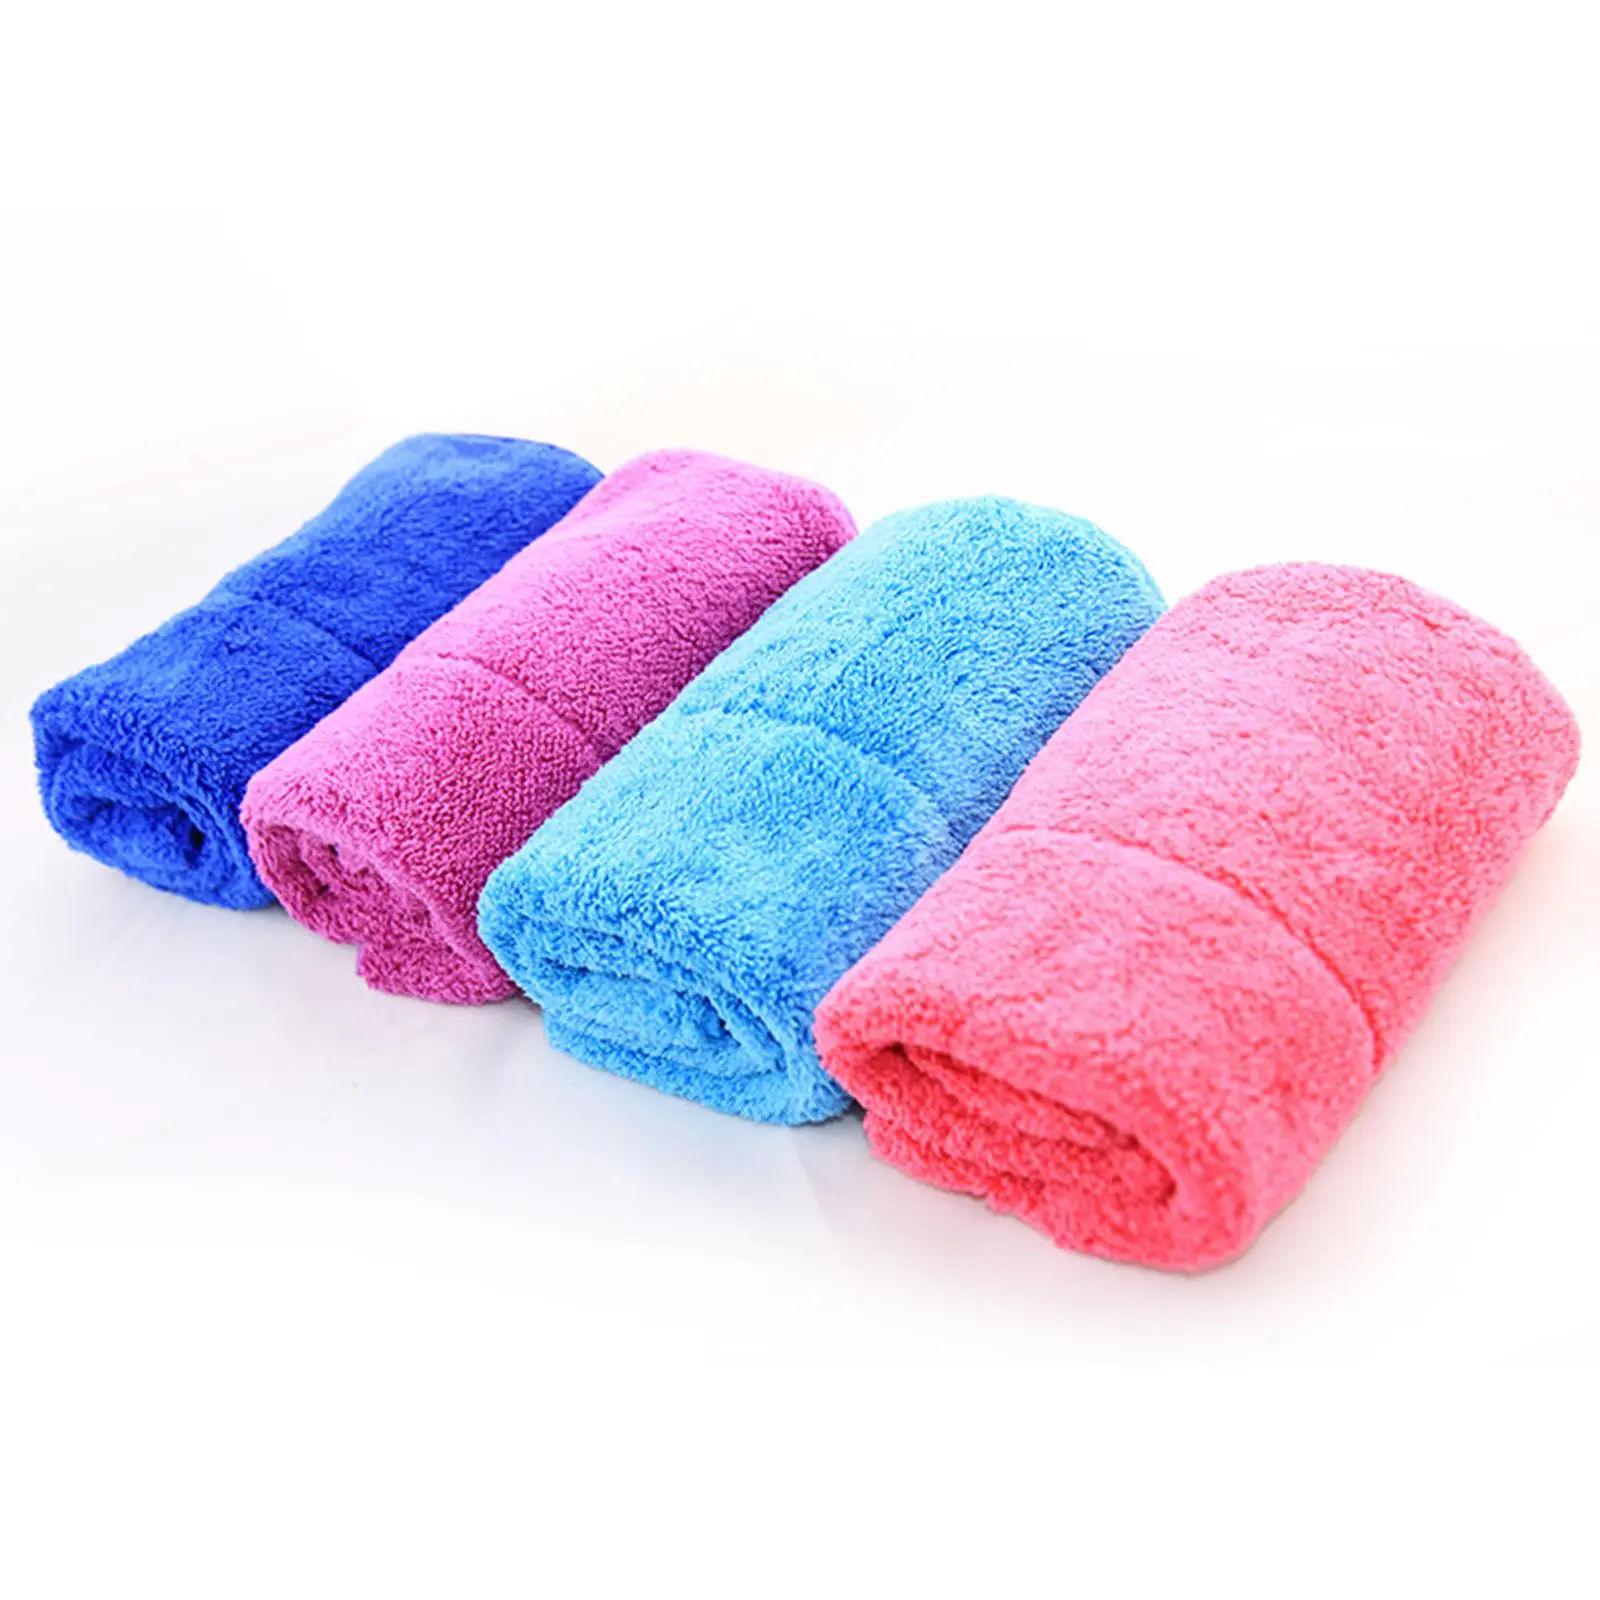 Ice Skate Wipe Cloth Cleaning Washcloths High Absorbent Comfortable for Shoe Hockey Skates Skating Figure Skates Kitchen